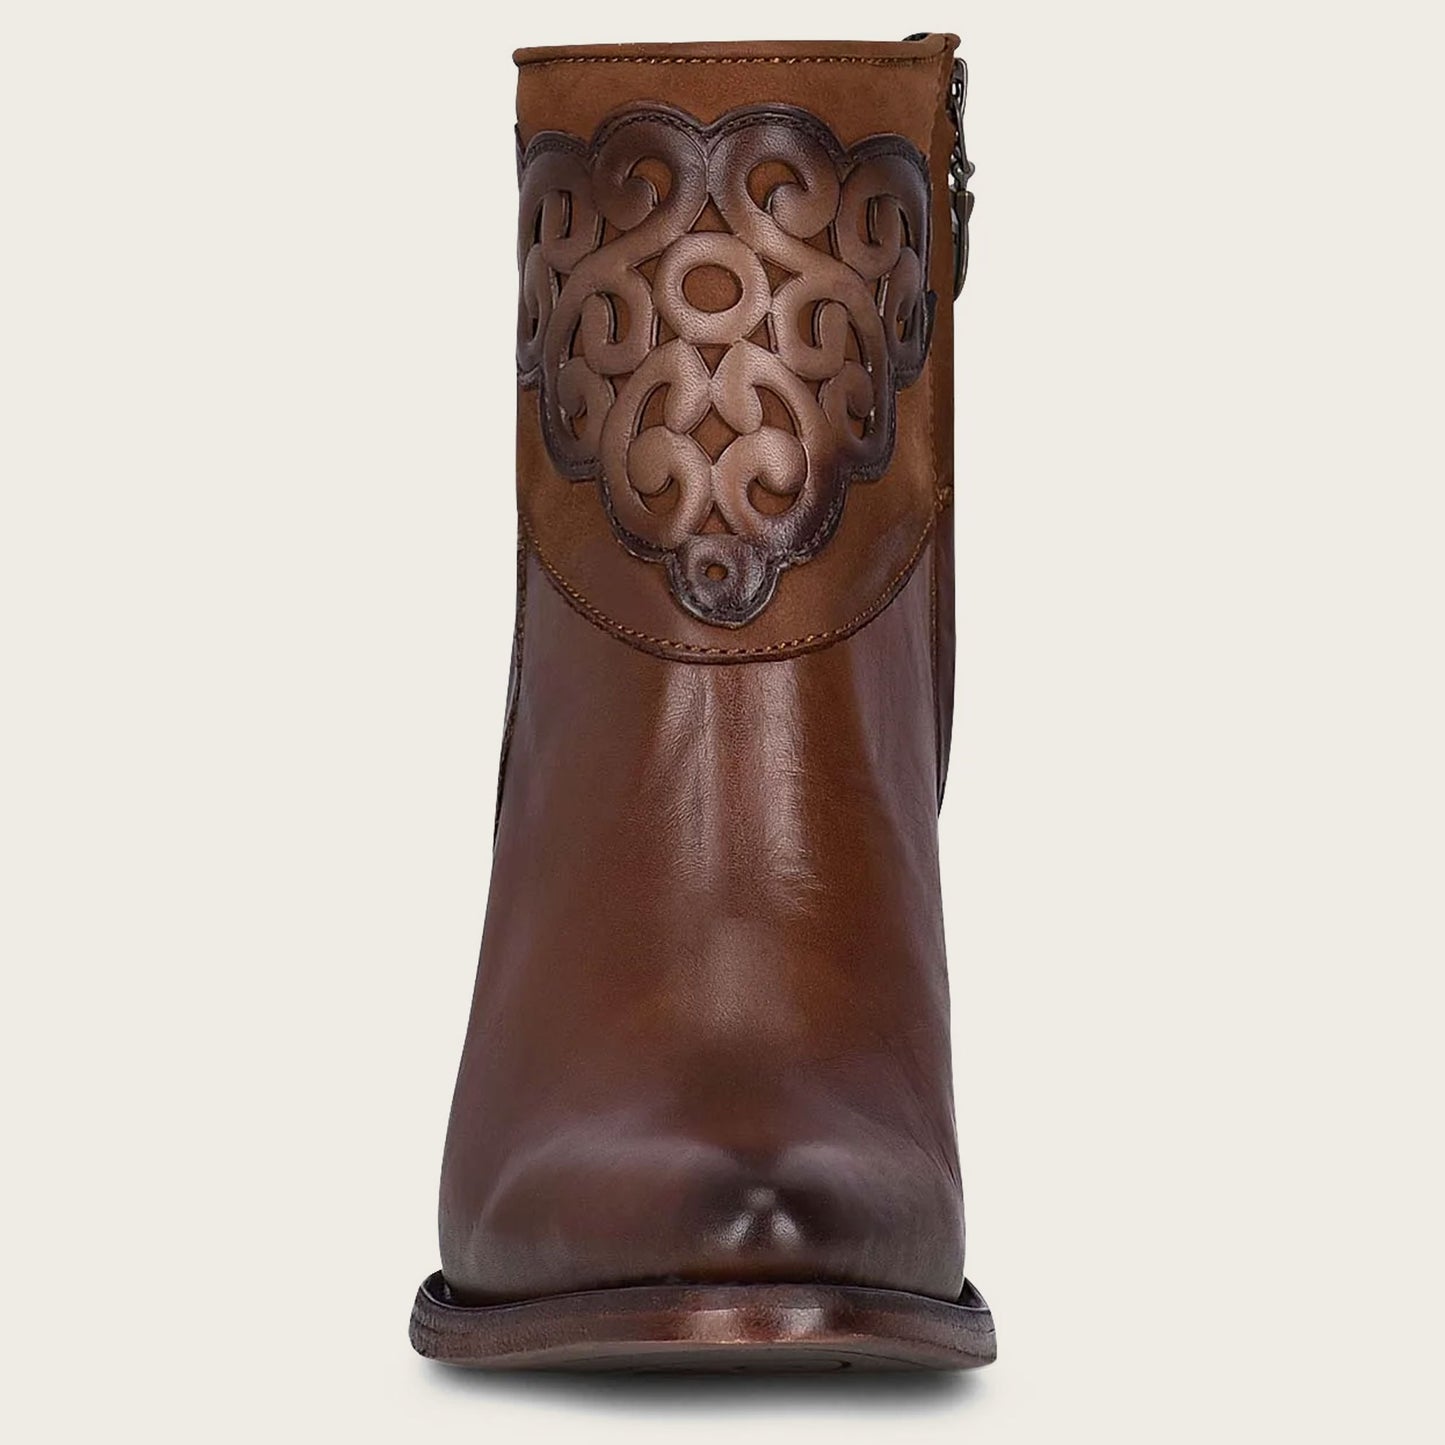 Stylish and versatile brown leather bootie with a sleek design, perfect for any occasion.